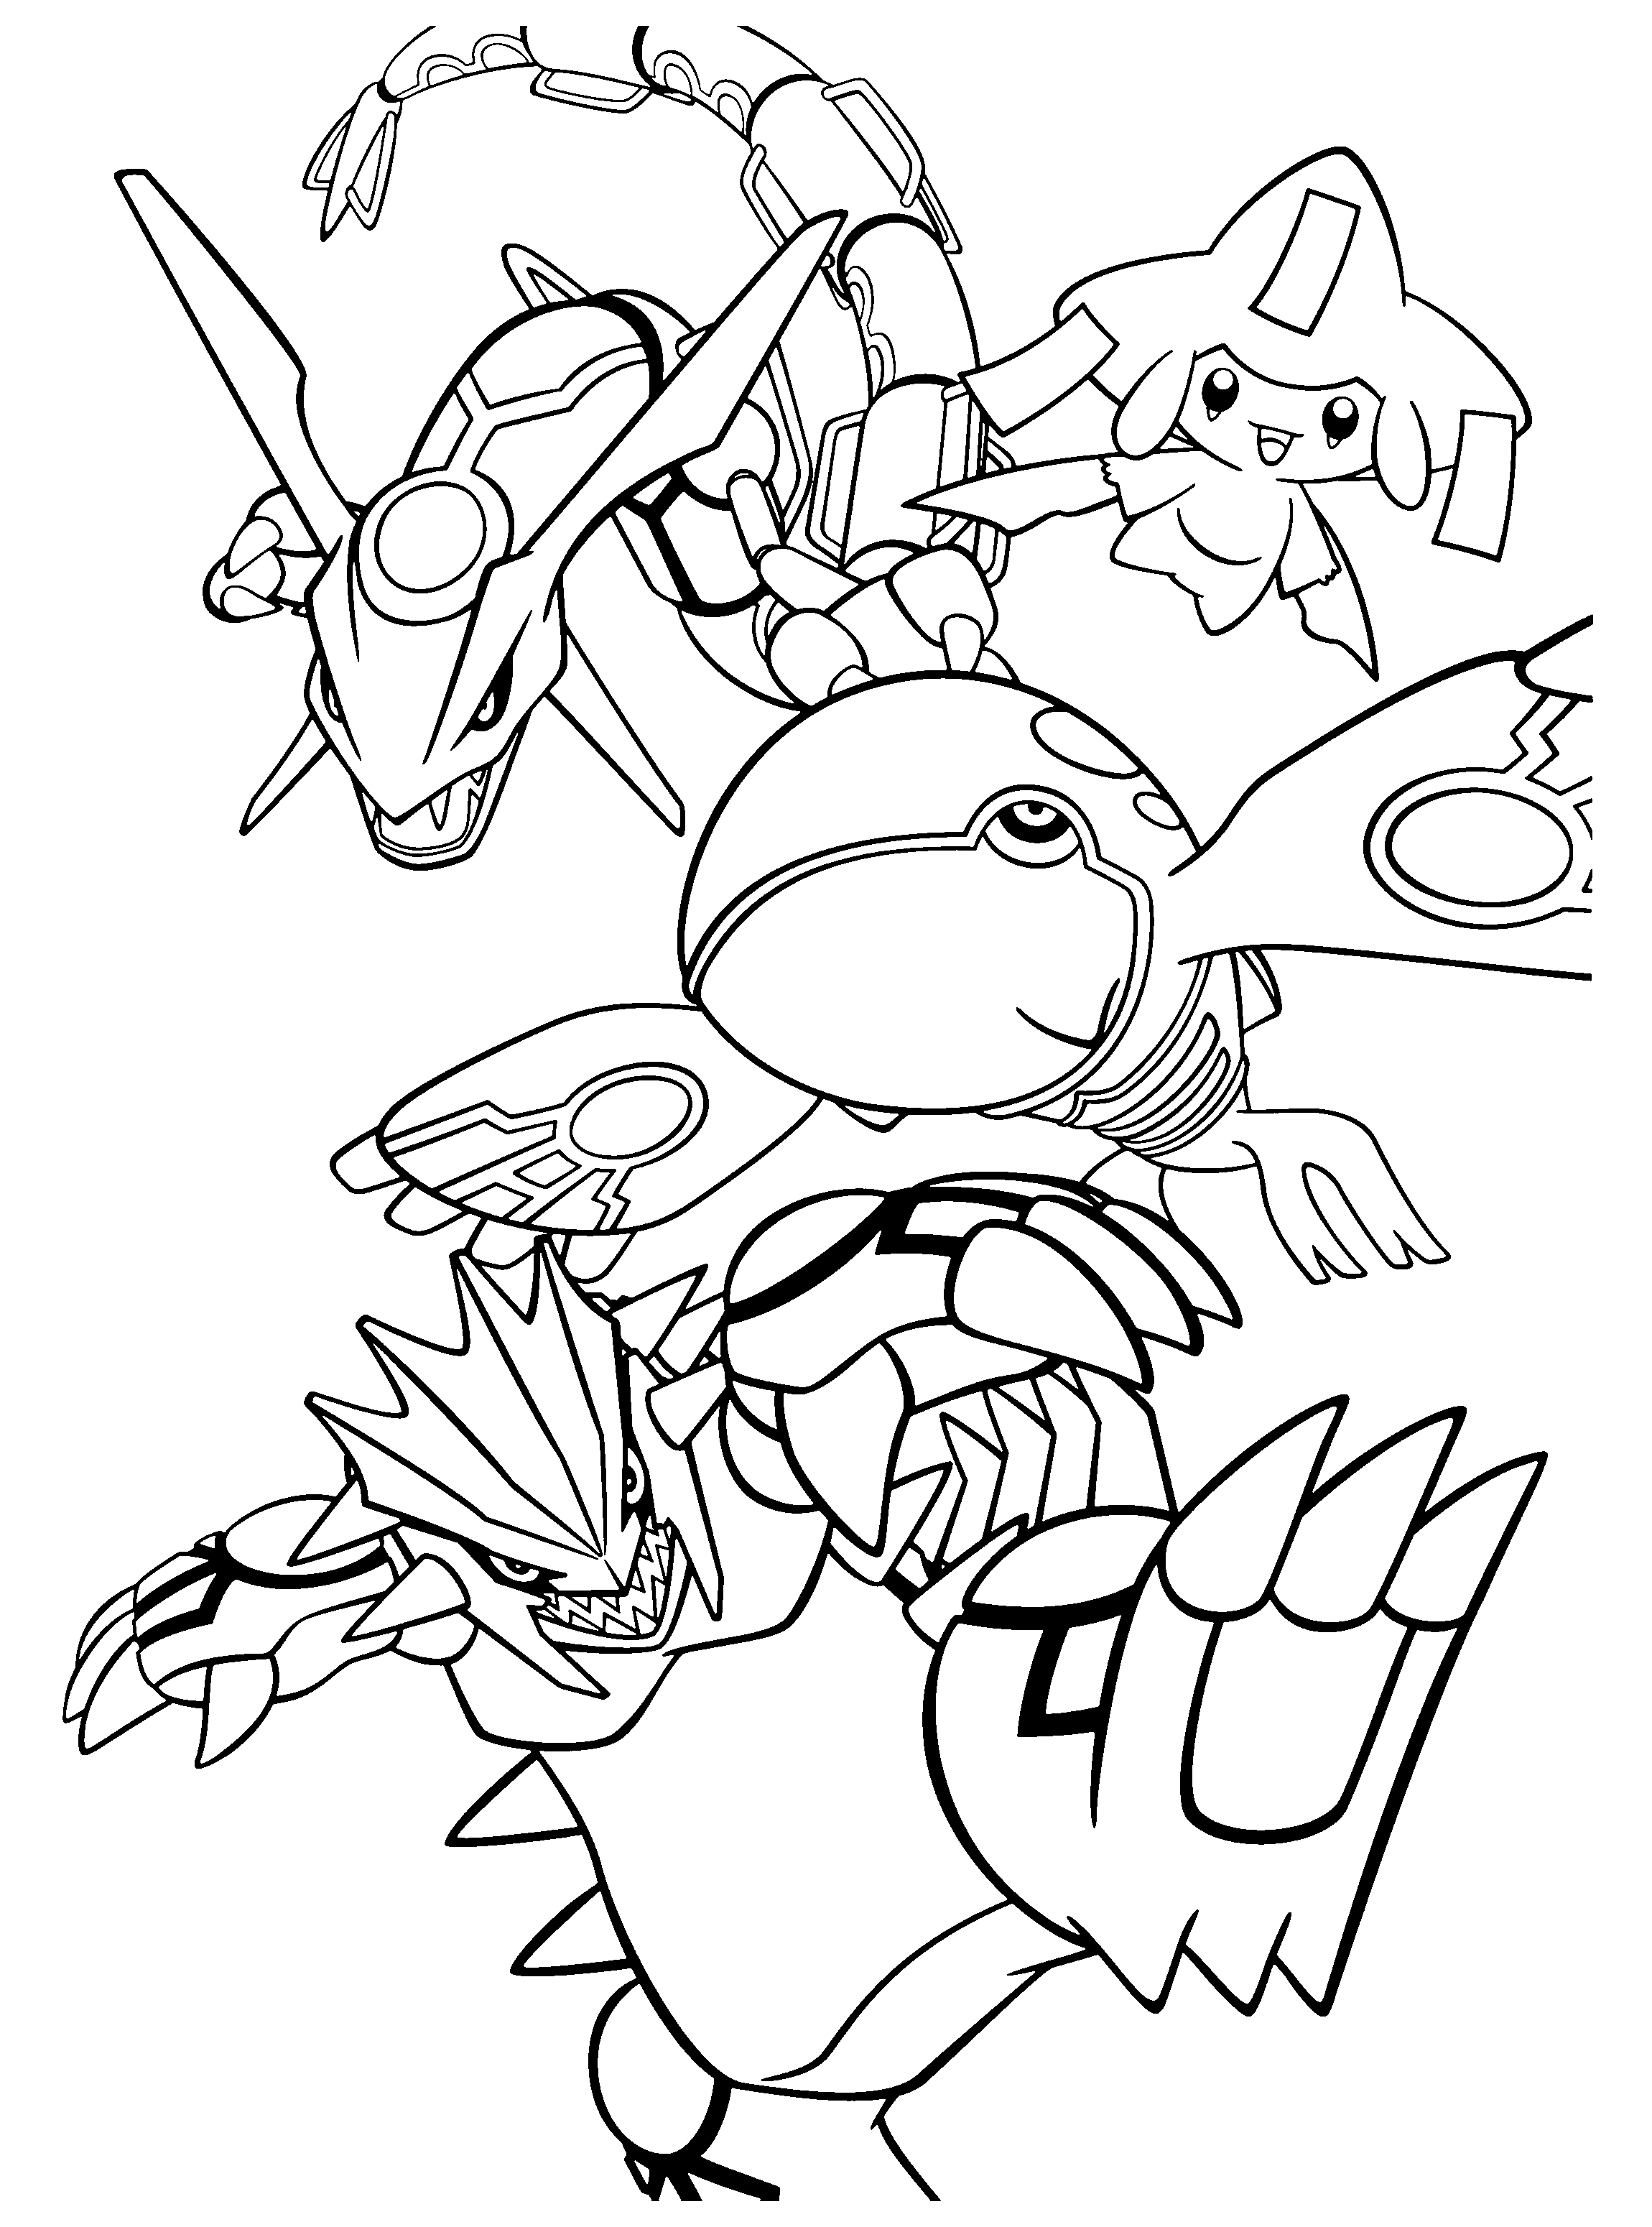 Pokemon Coloring Pages Groudon - Coloring Home